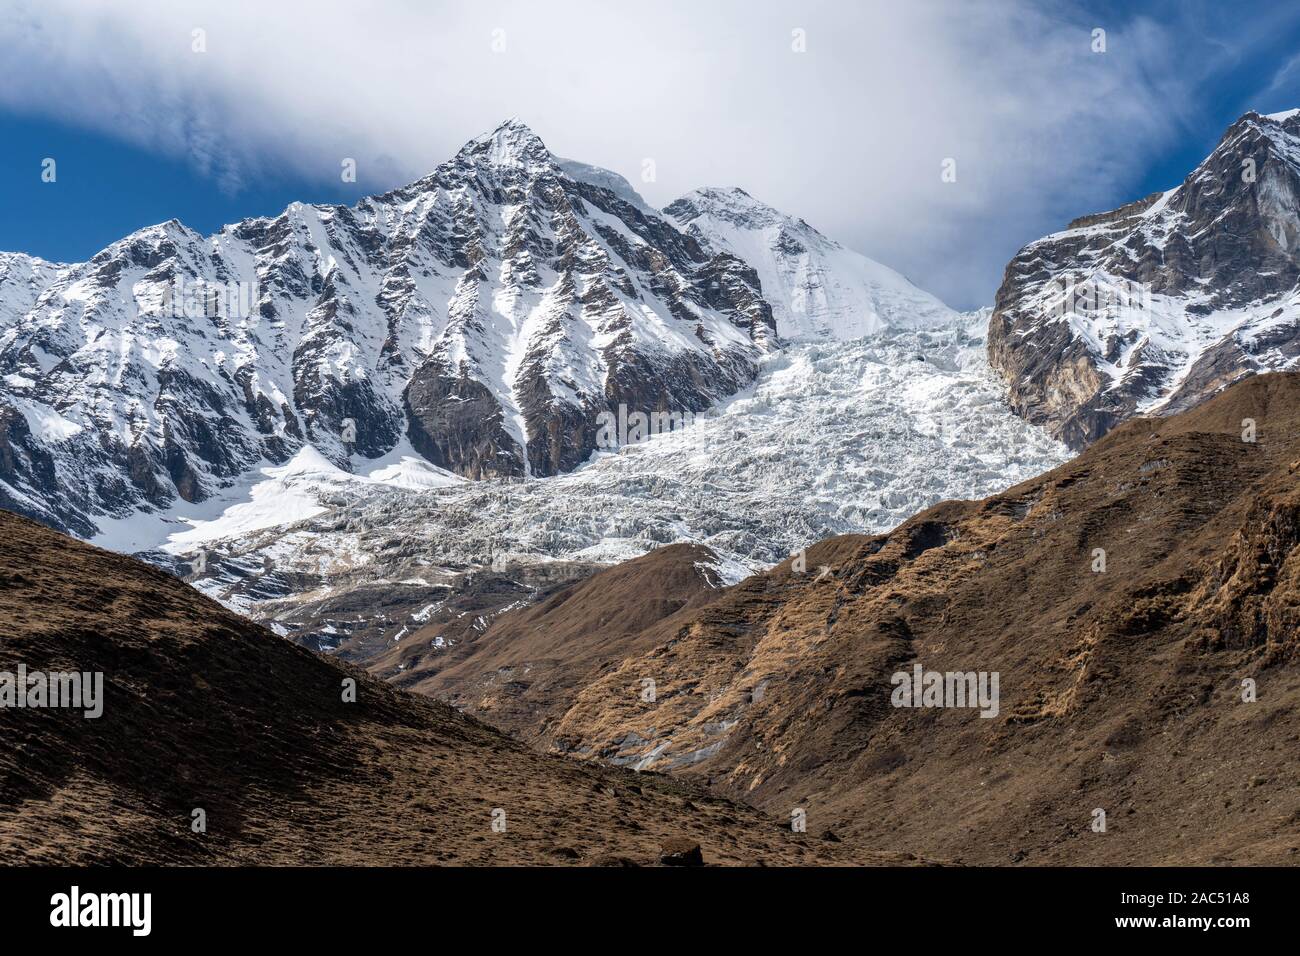 Close up of Dhaulagiri icefall. Snow capped mountain with glacier flowing from top. Nepal Stock Photo